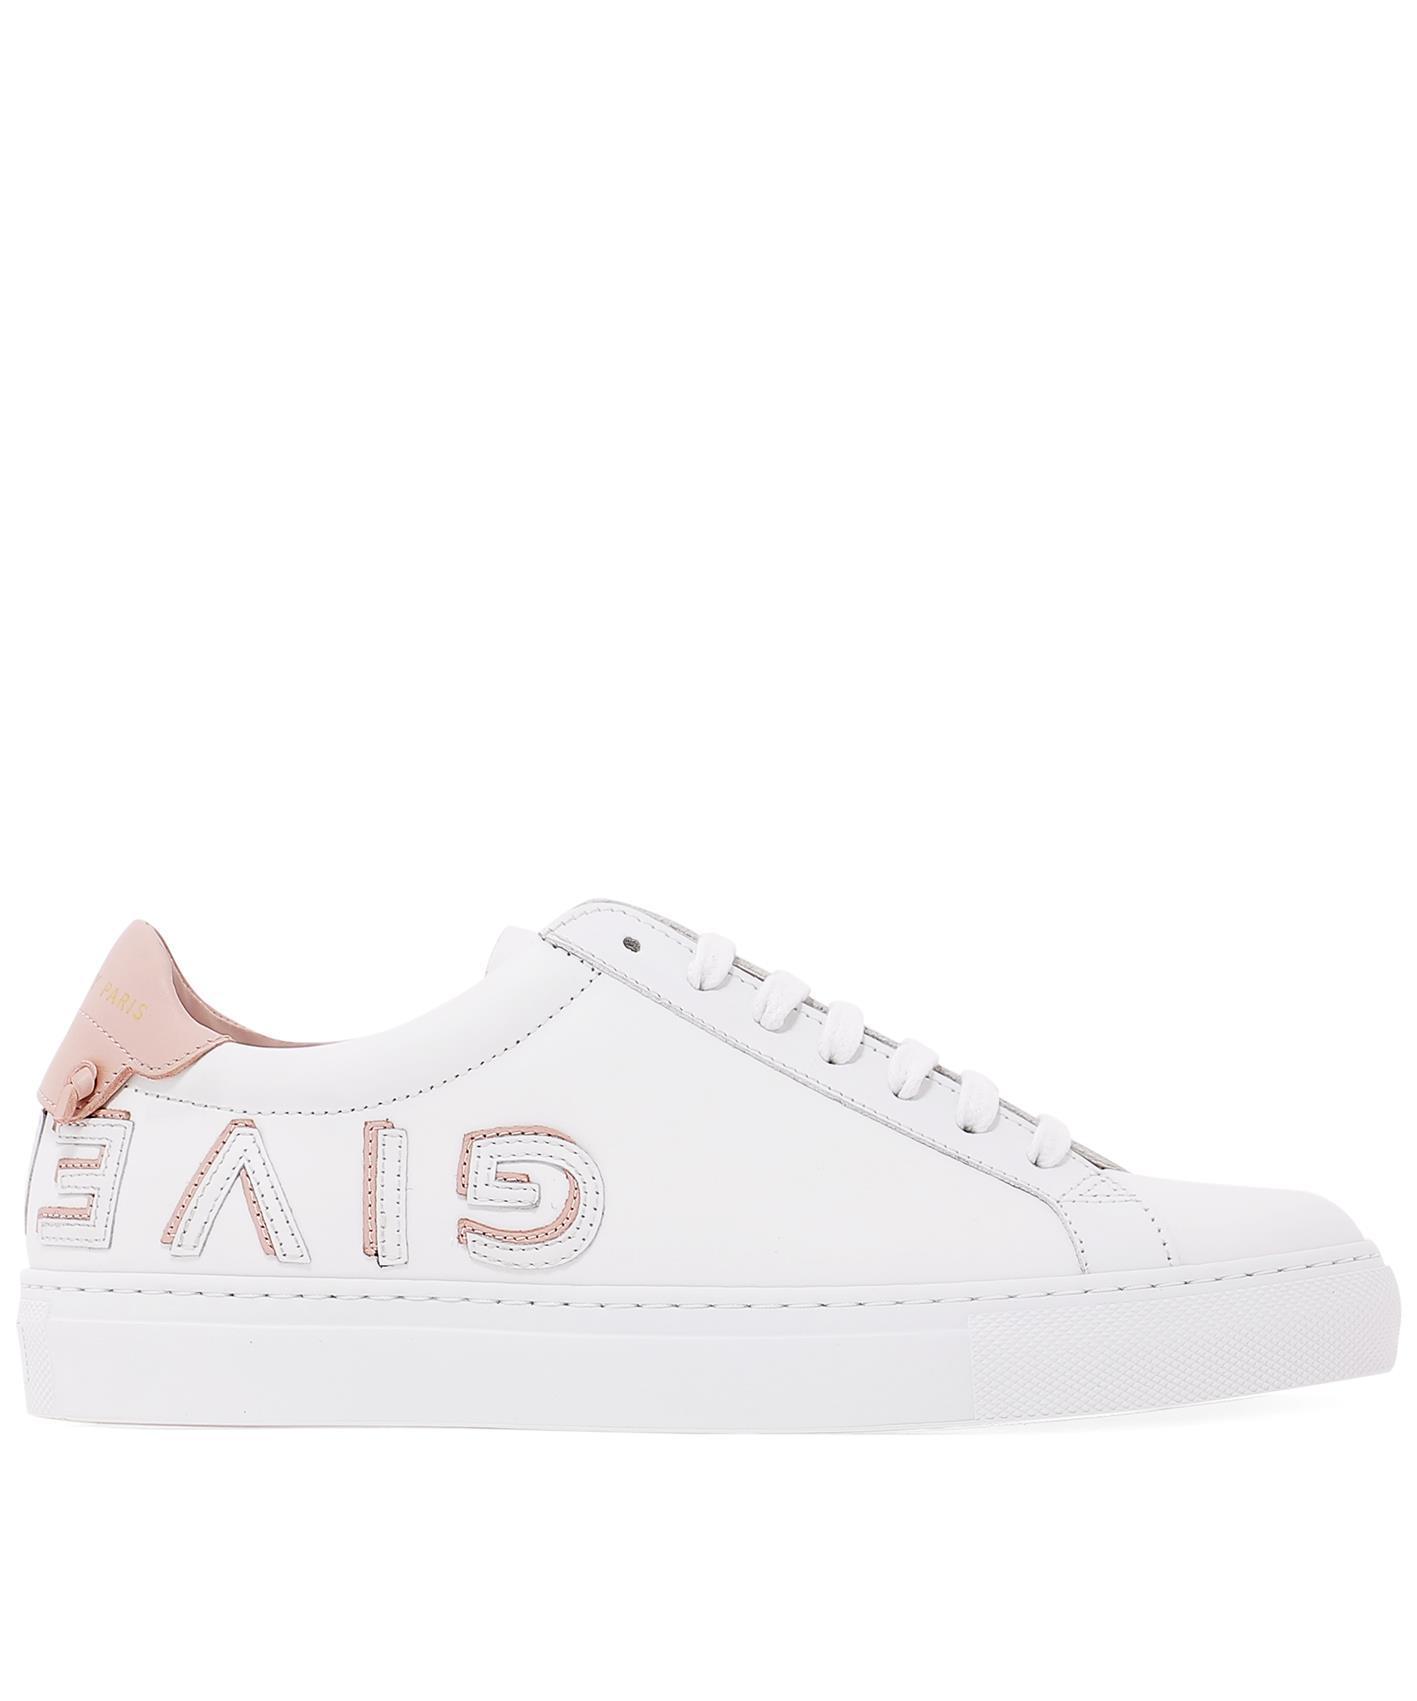 Givenchy Urban Street White And Pink Logo Reverse Sneakers | Lyst